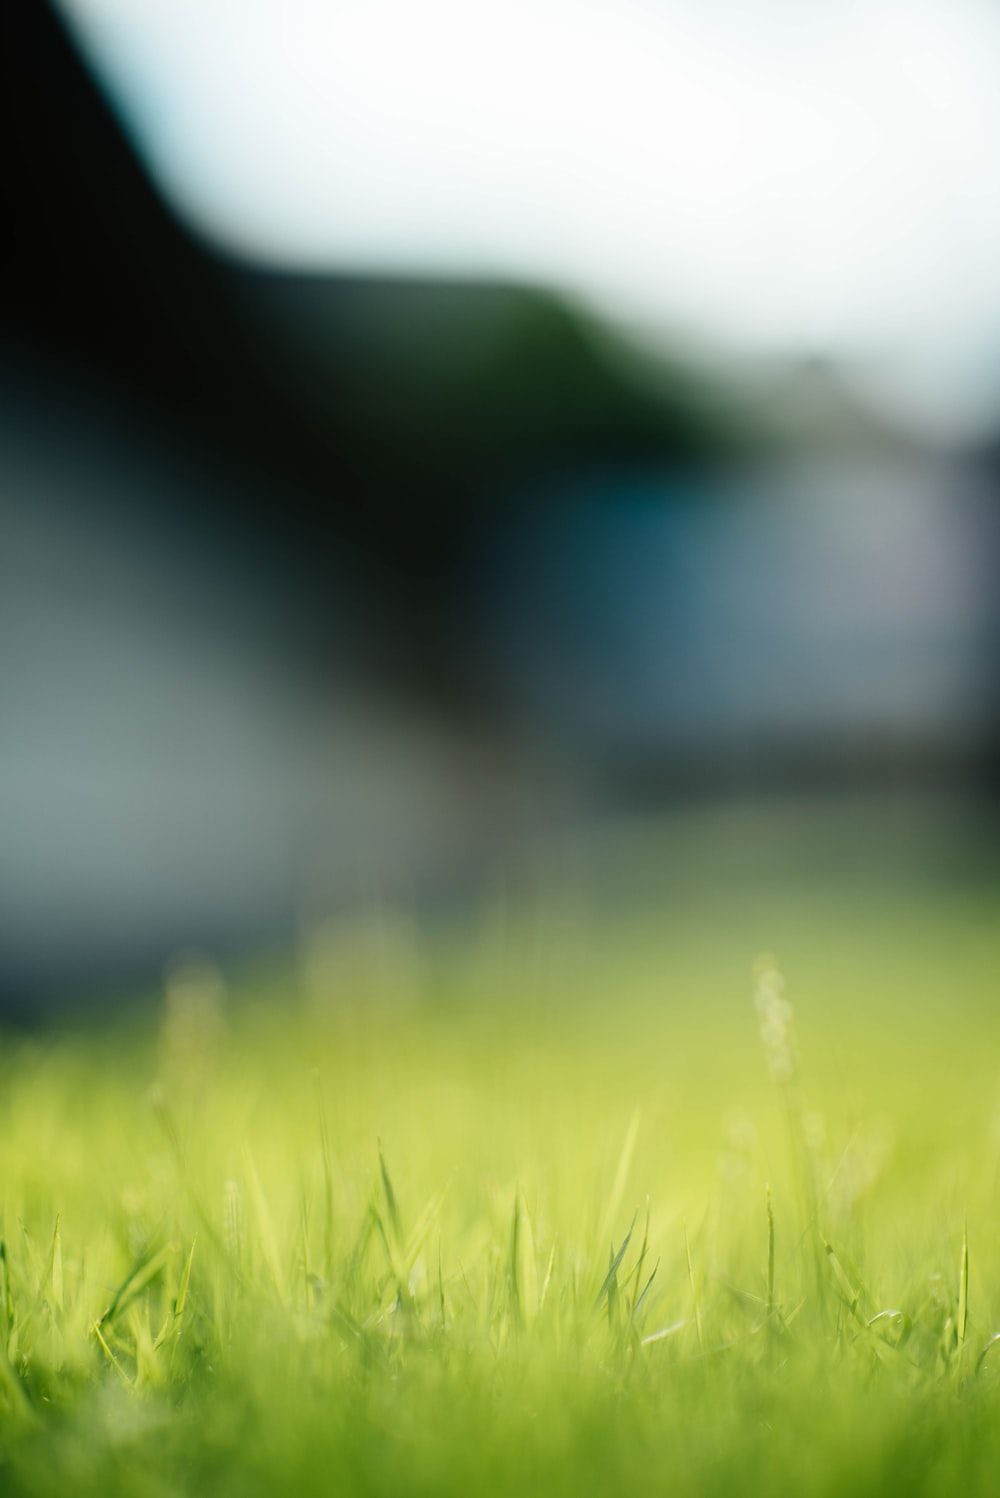 Grass Background Image: Download HD Background